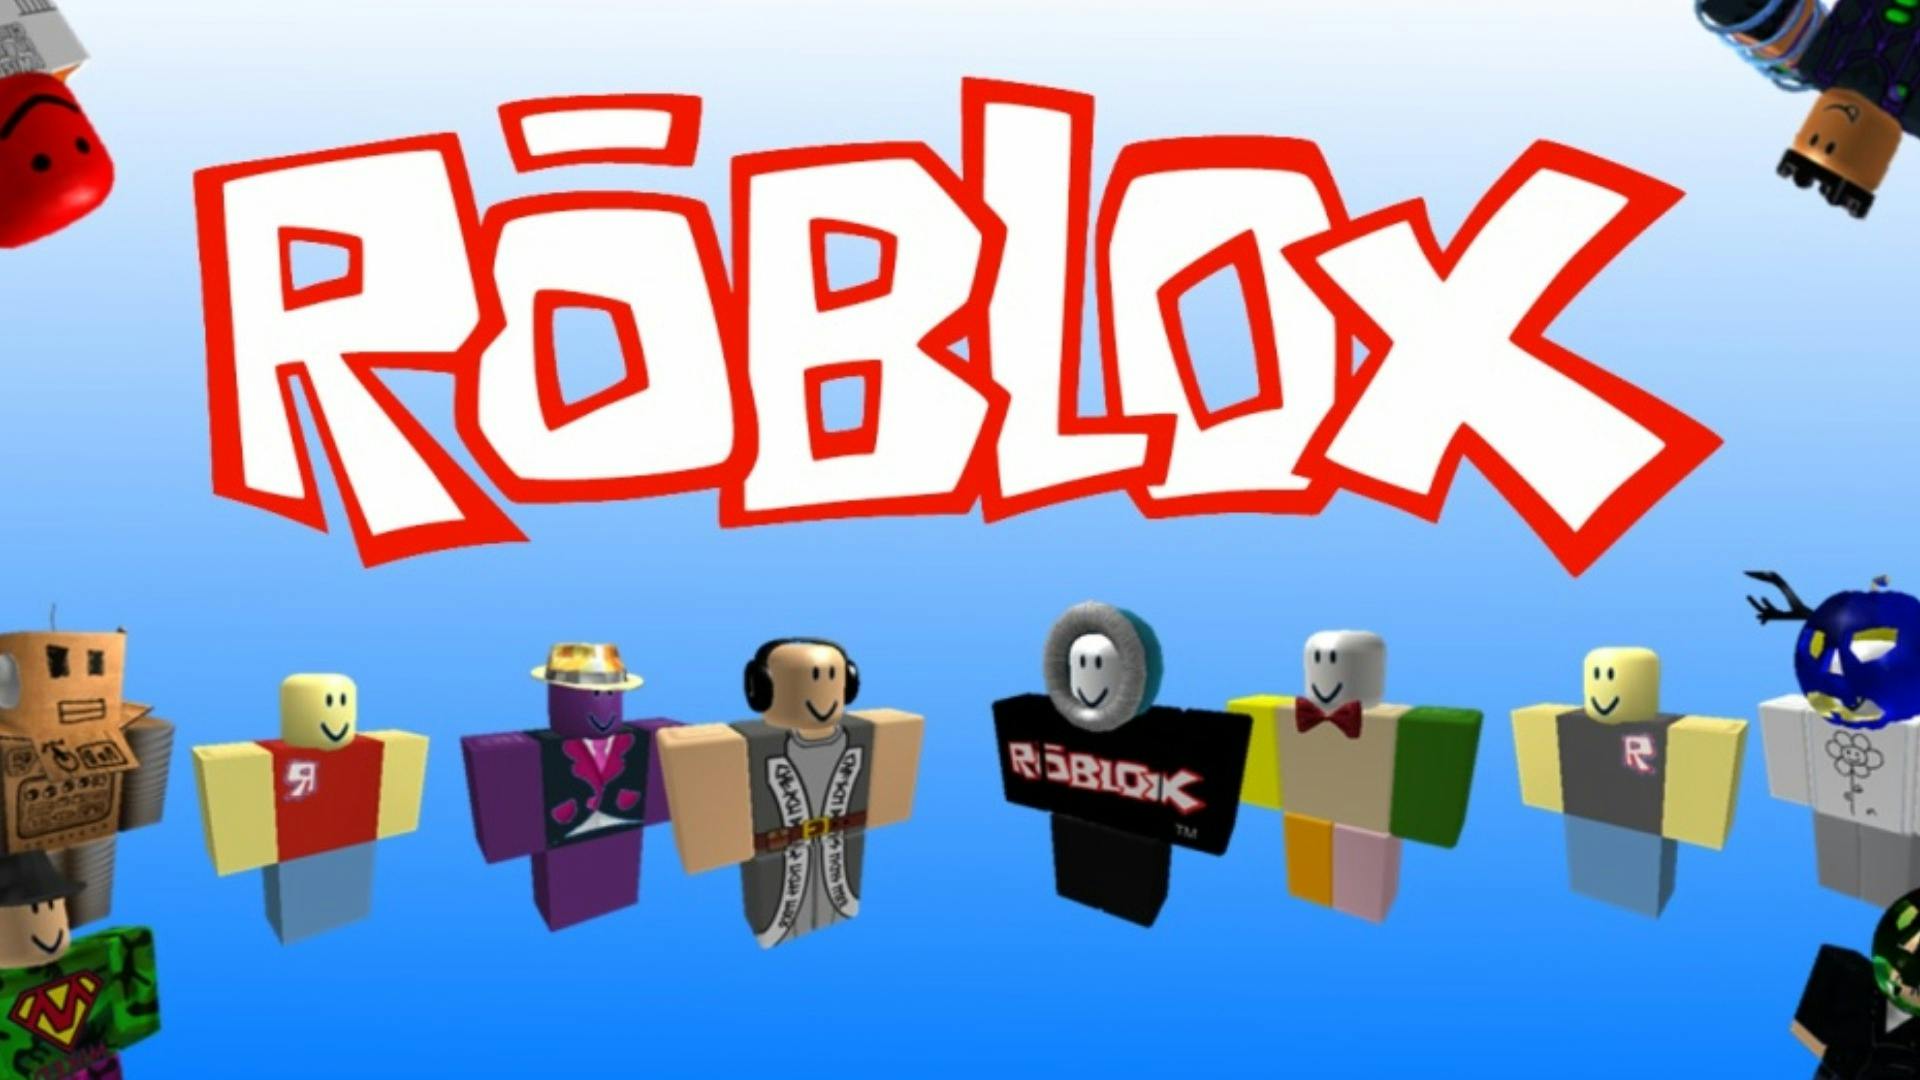 robux hack no human verification or offers